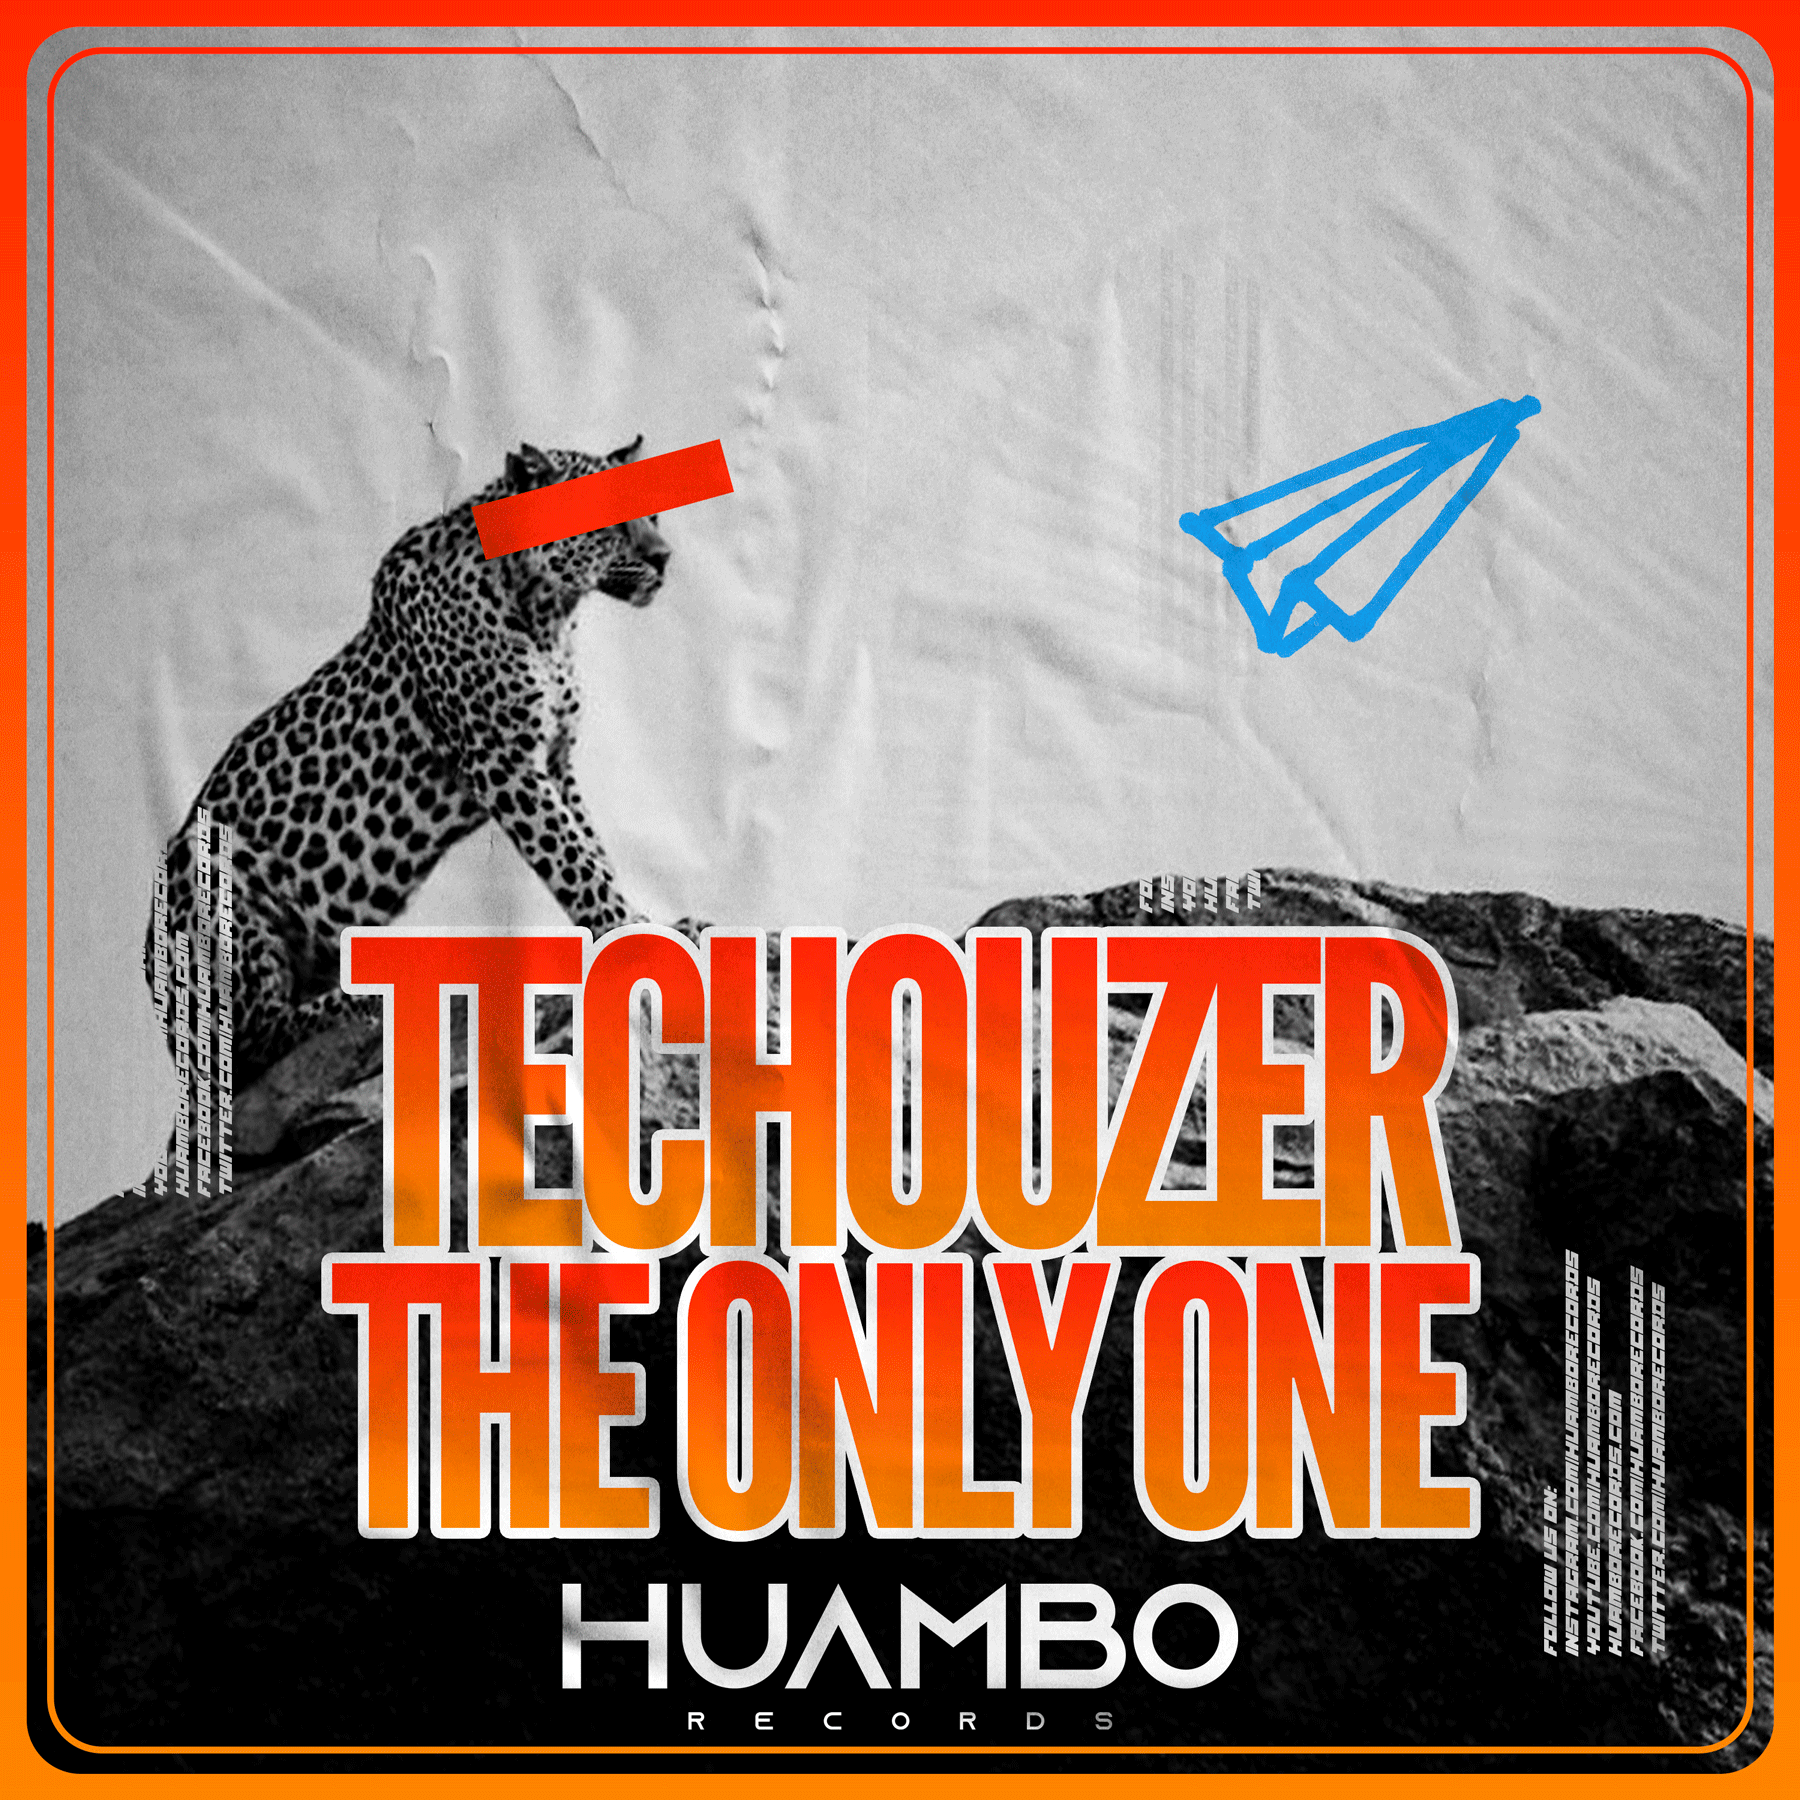 “The Only One” is the new Ep by the Spanish DJ and producer TecHouzer